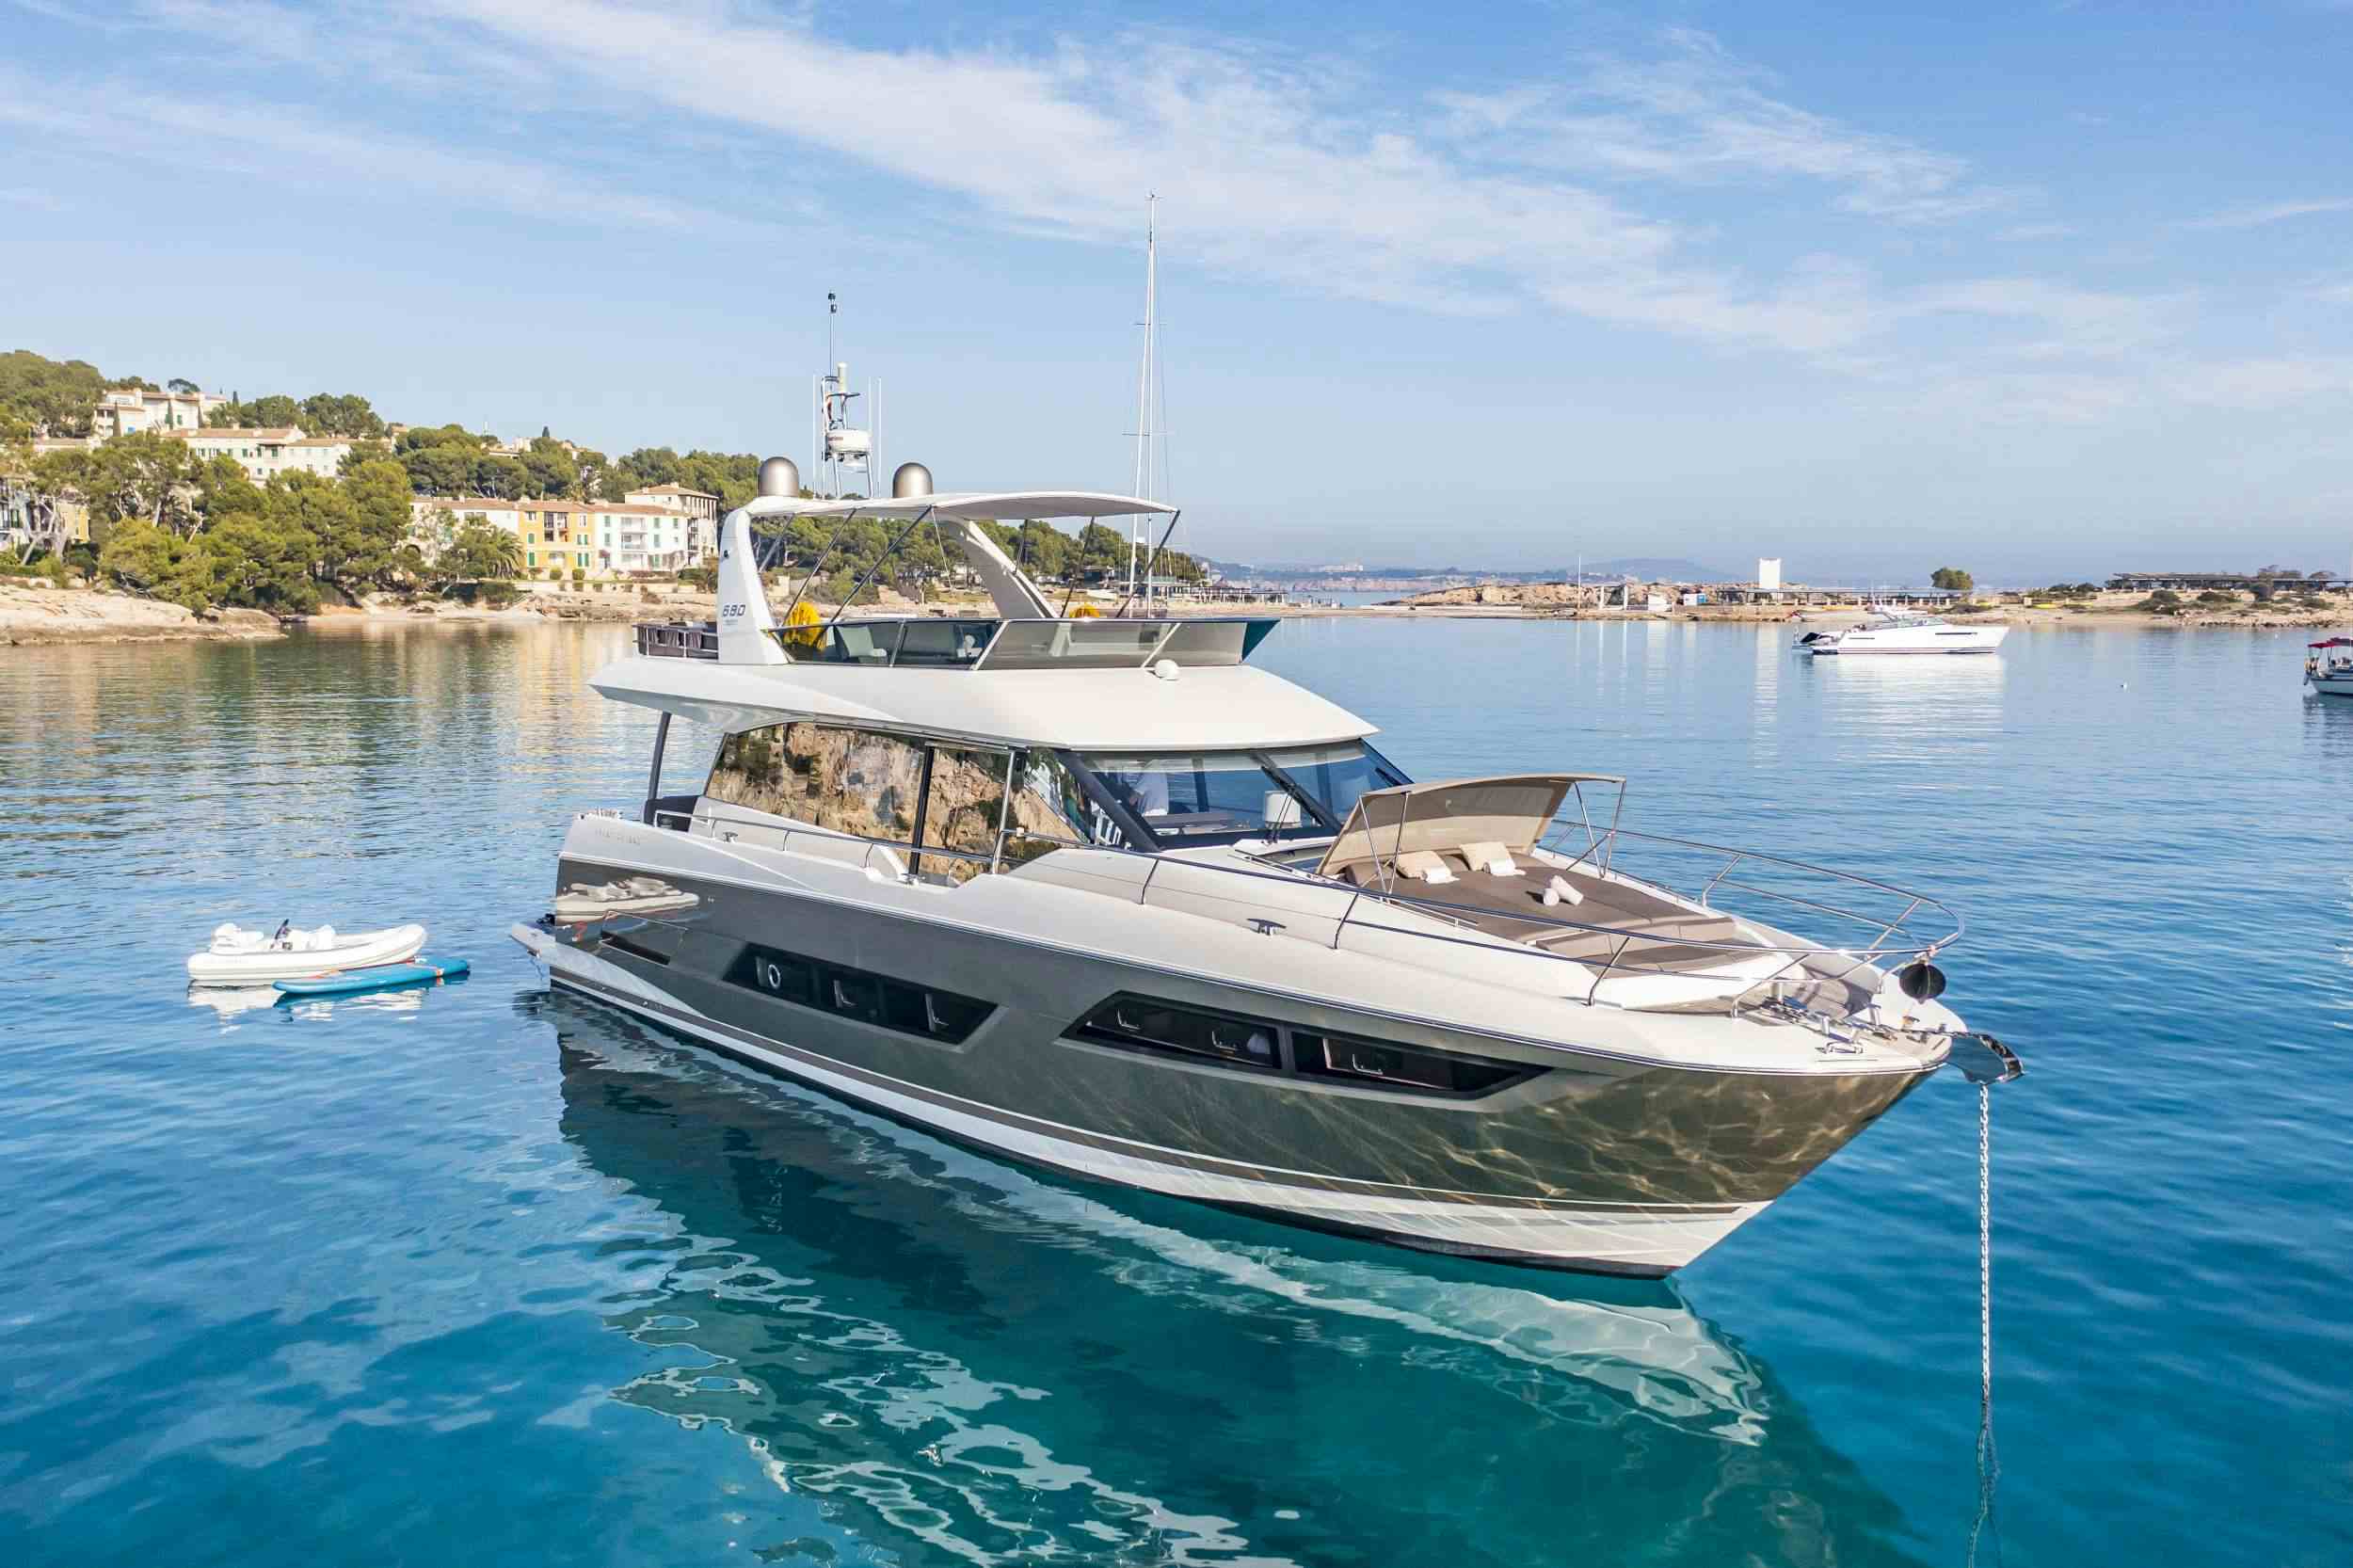 BLUE M - Yacht Charter Cannes & Boat hire in W. Med -Naples/Sicily, W. Med -Riviera/Cors/Sard., W. Med - Spain/Balearics | Winter: Caribbean Virgin Islands (US/BVI), Caribbean Leewards, Caribbean Windwards 1